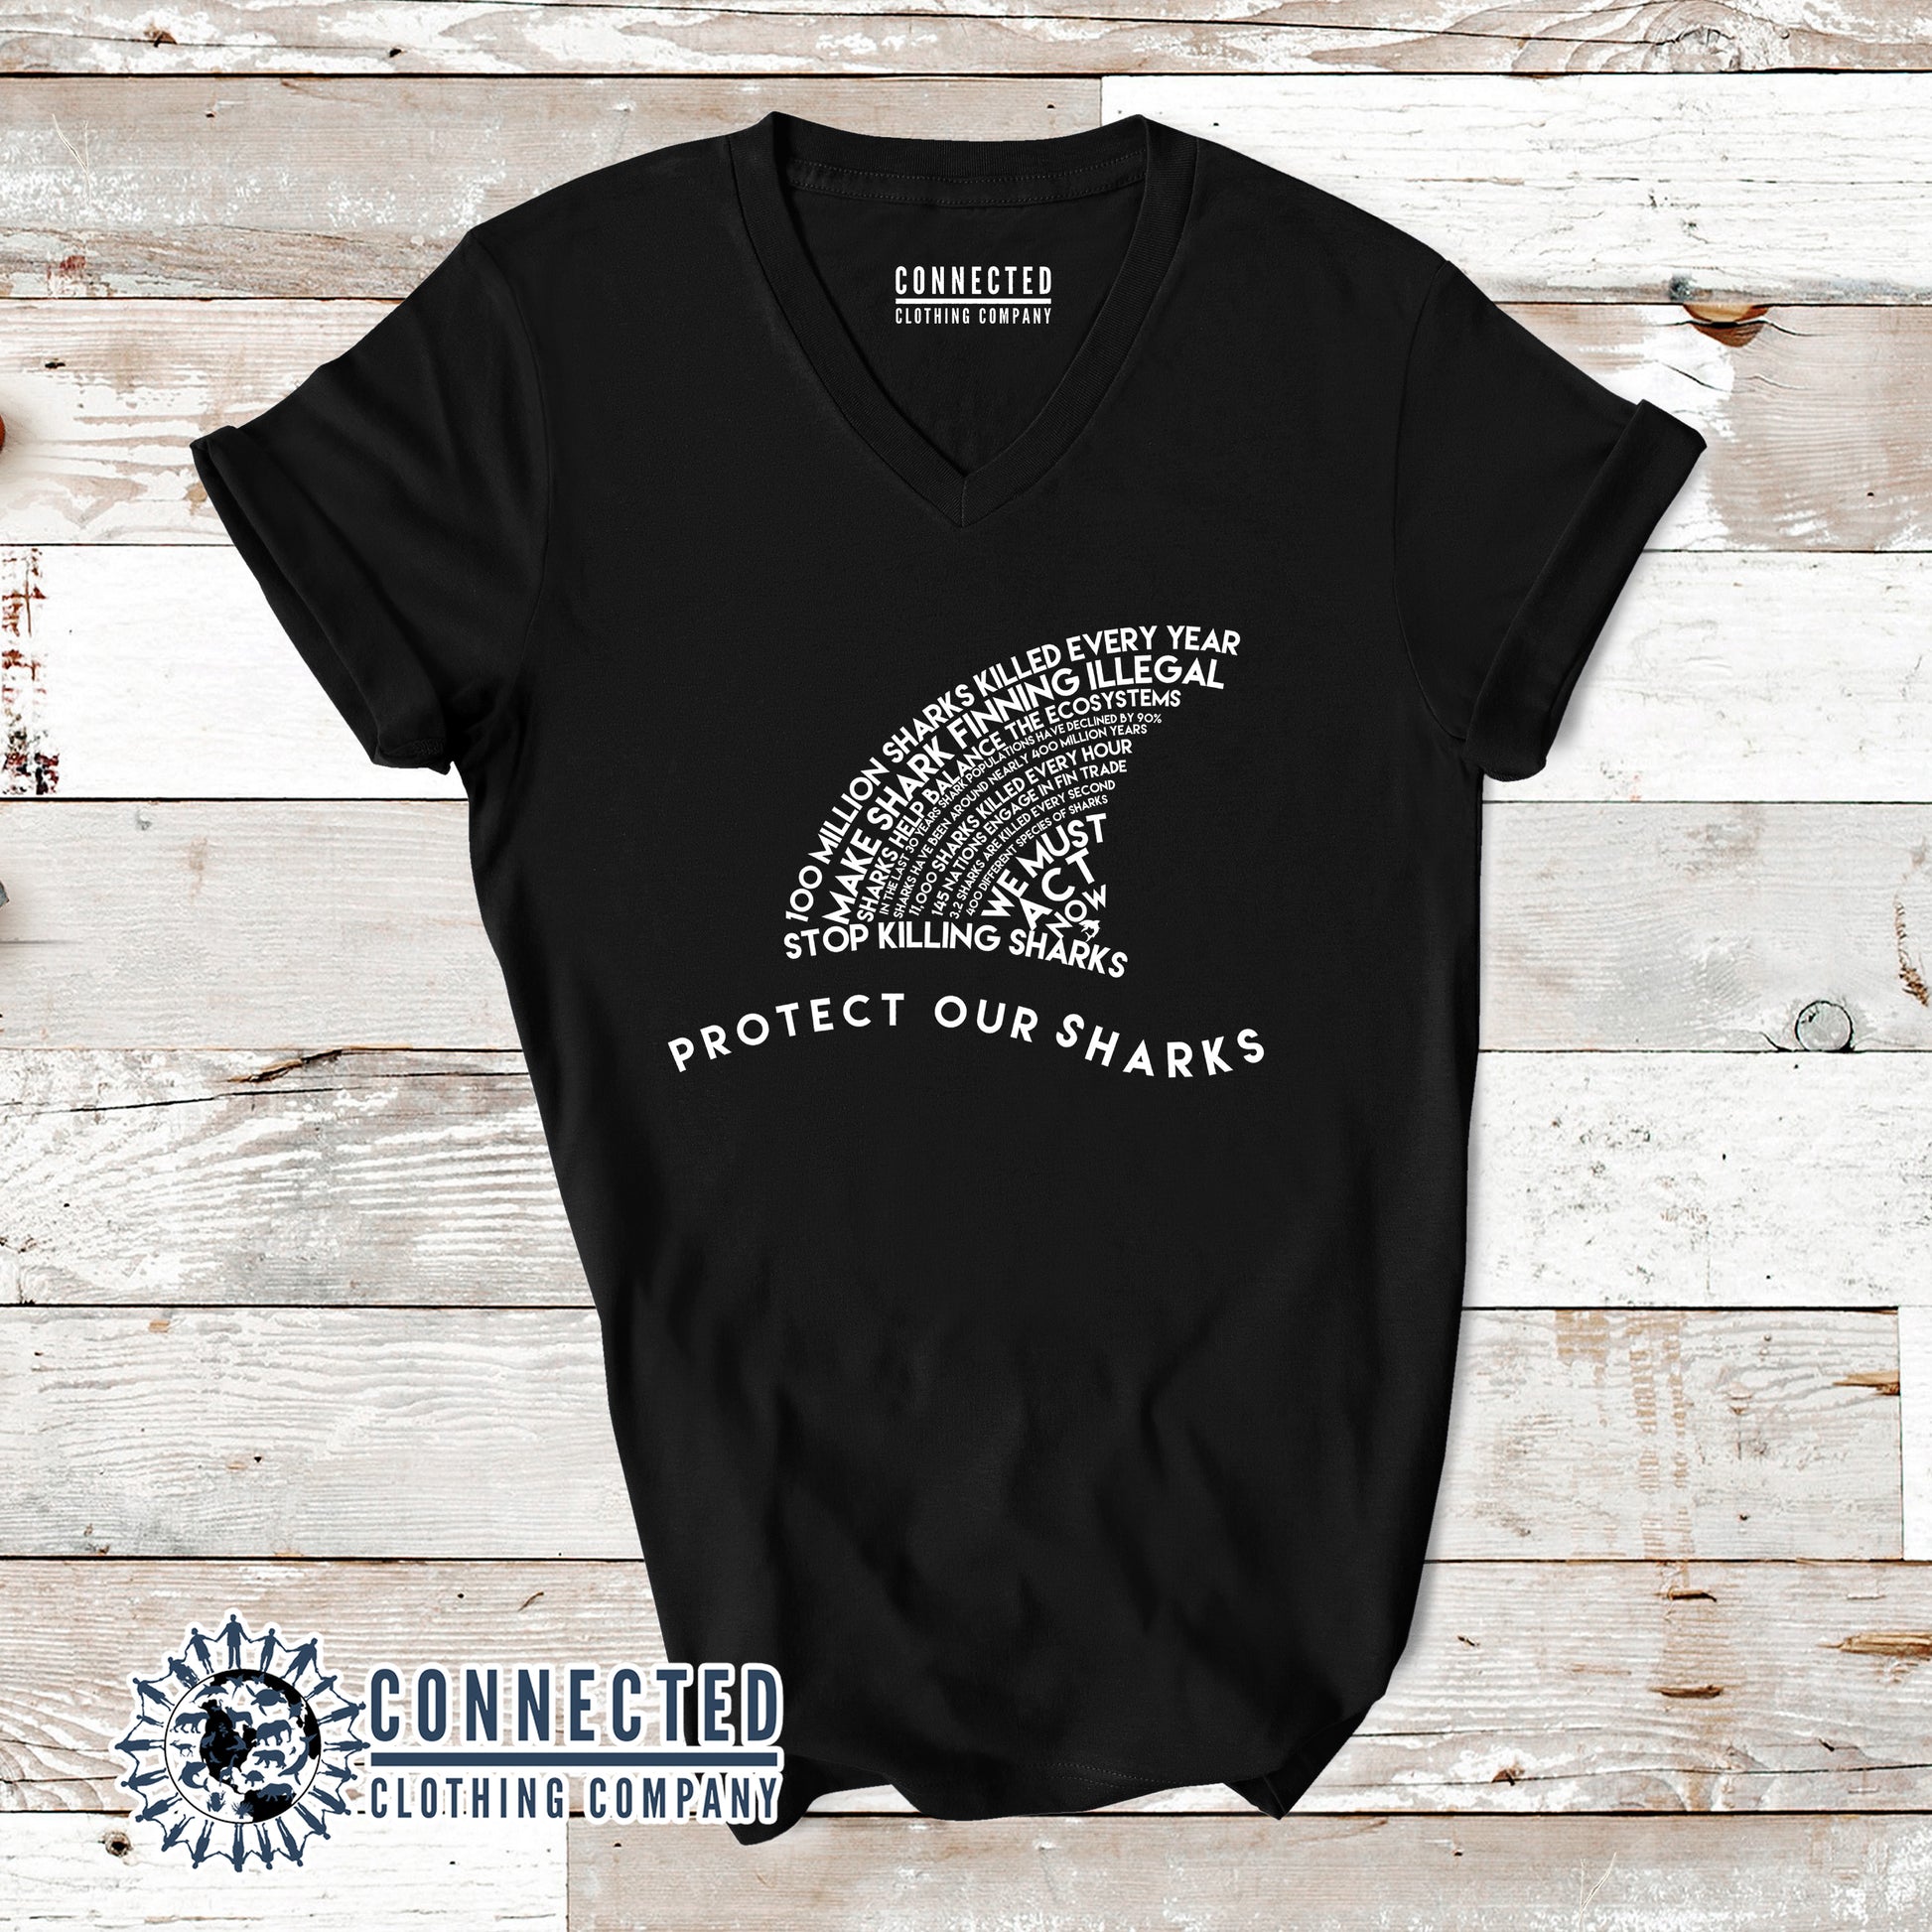 Black Protect Our Sharks Short-Sleeve Women's V-Neck Tee - Connected Clothing Company - Ethically and Sustainably Made - 10% of profits donated to shark conservation